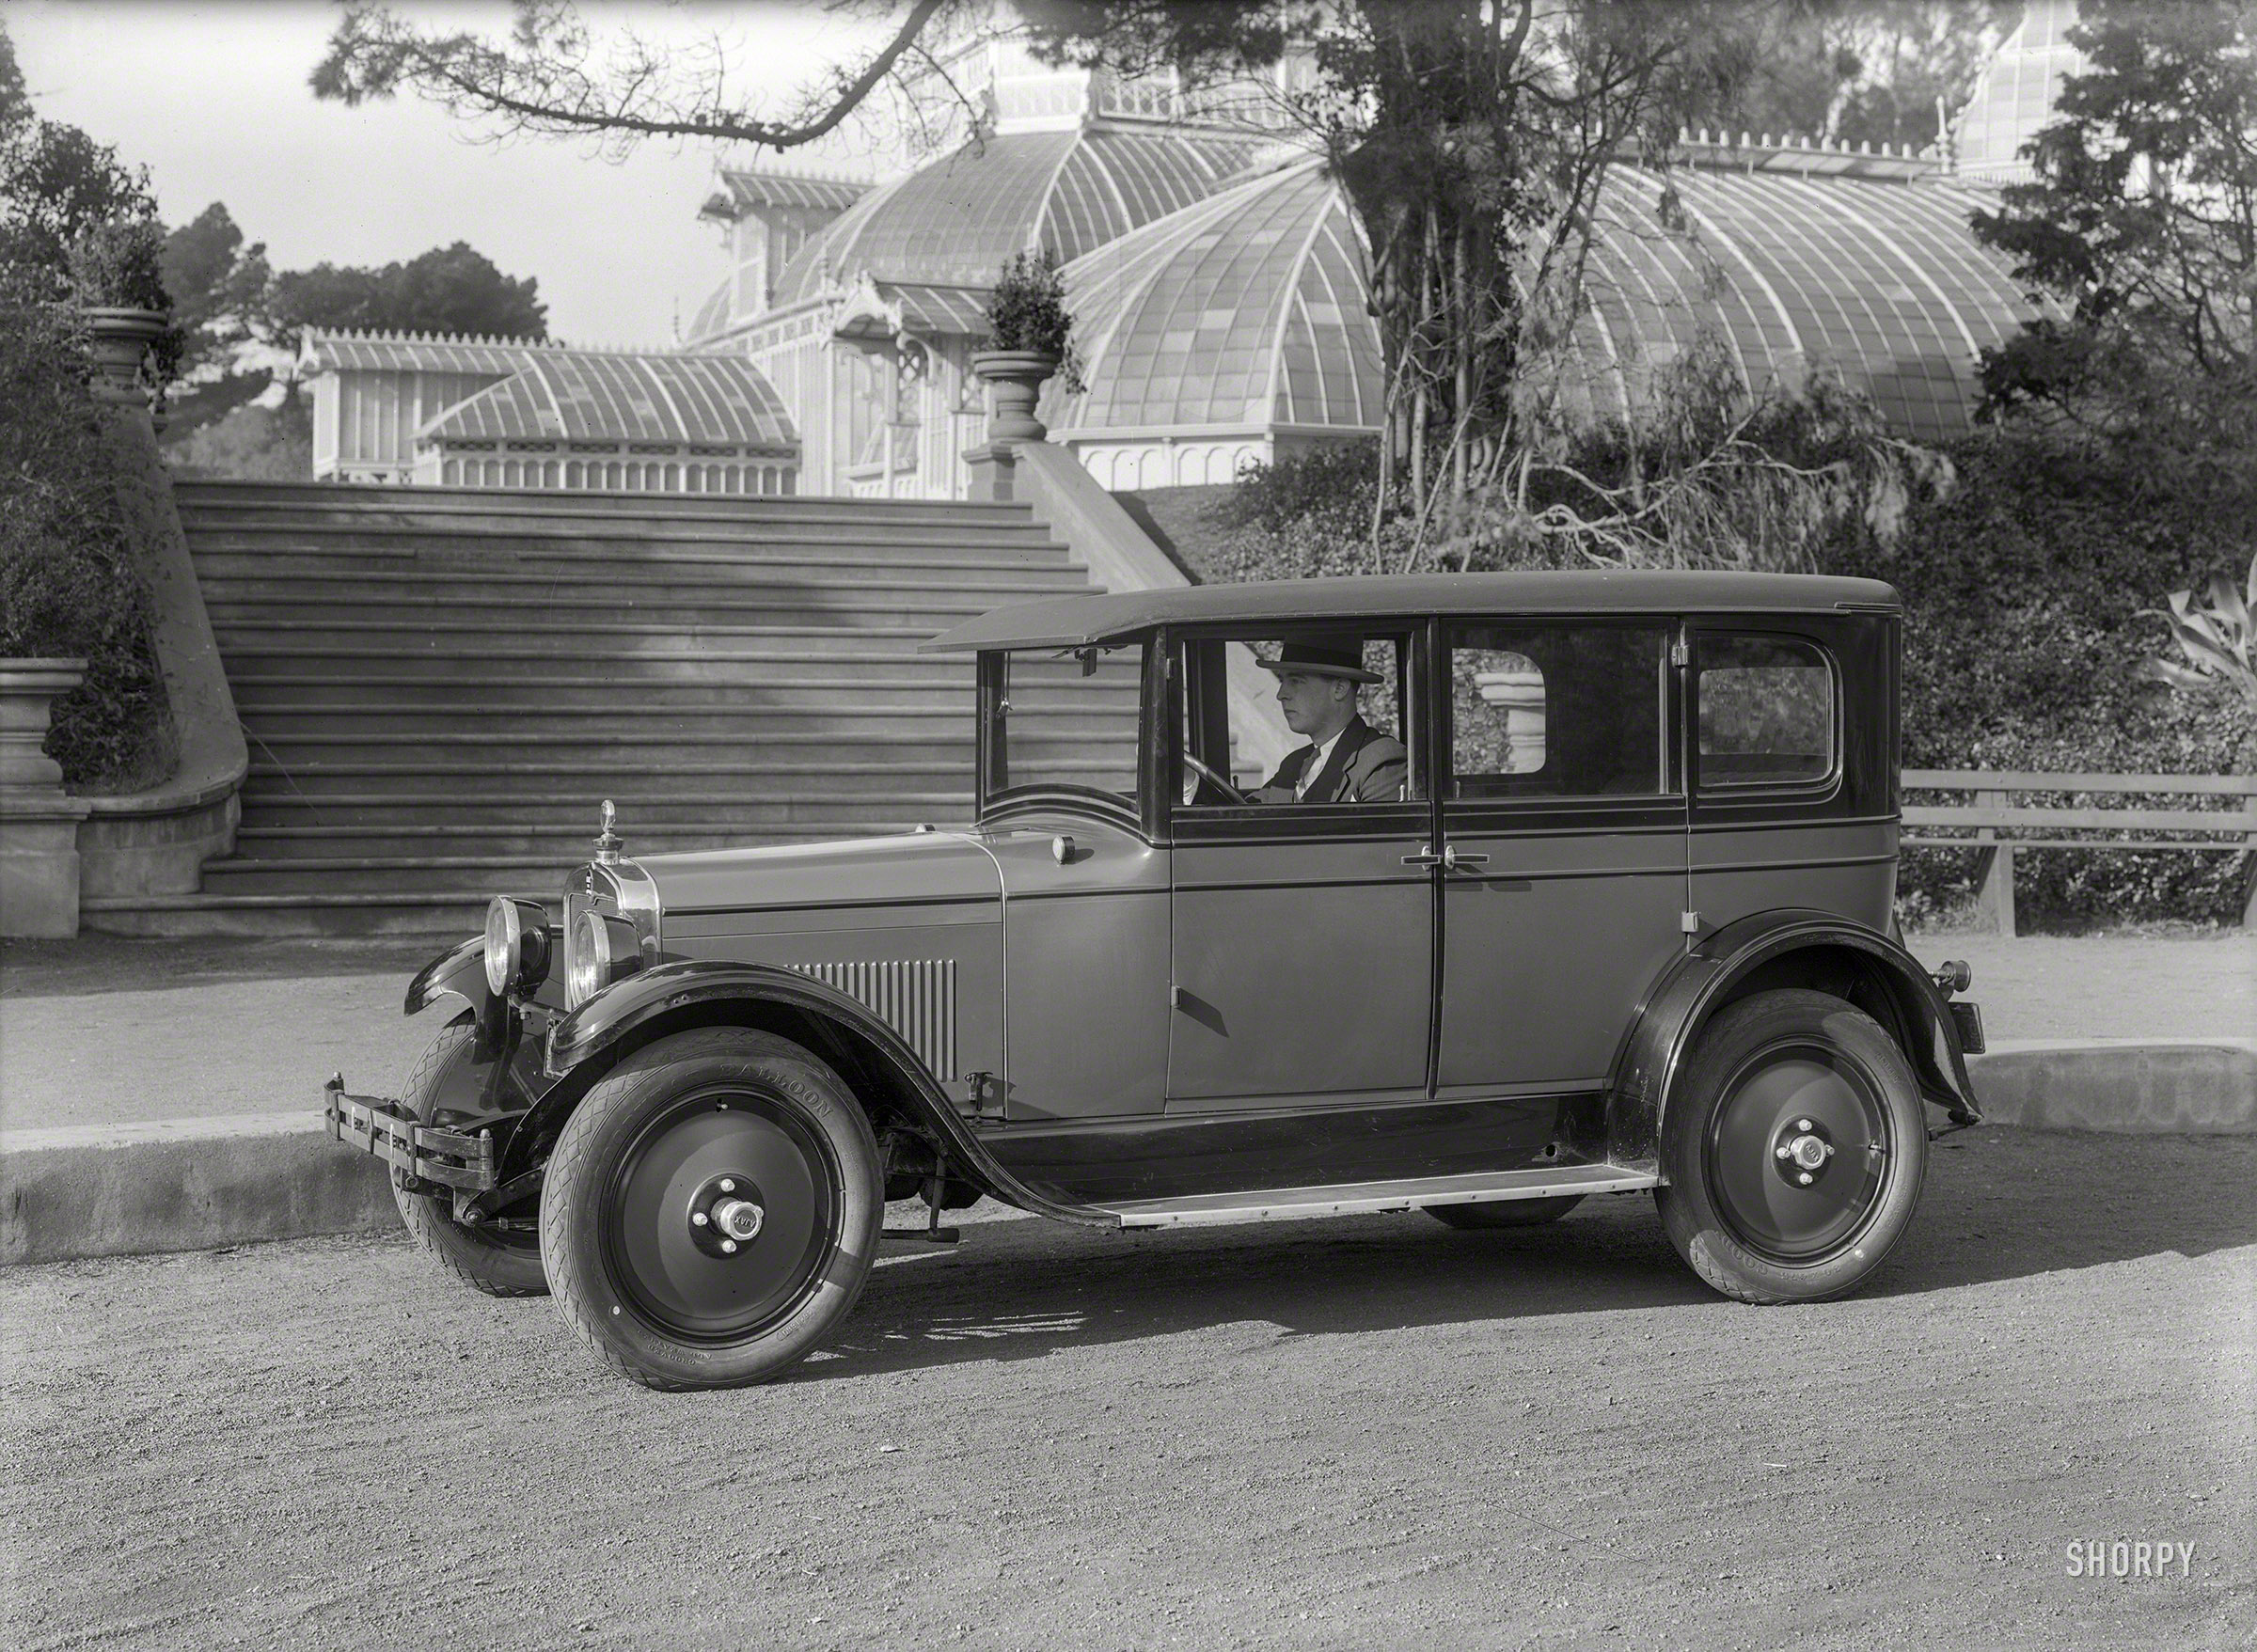 San Francisco, 1925. "Ajax Six sedan at Golden Gate Park Conservatory." The Ajax, manufactured by Nash Motors in Racine, Wisconsin, survived just two model years before expiring in 1926. 5x7 glass negative by Christopher Helin. View full size.